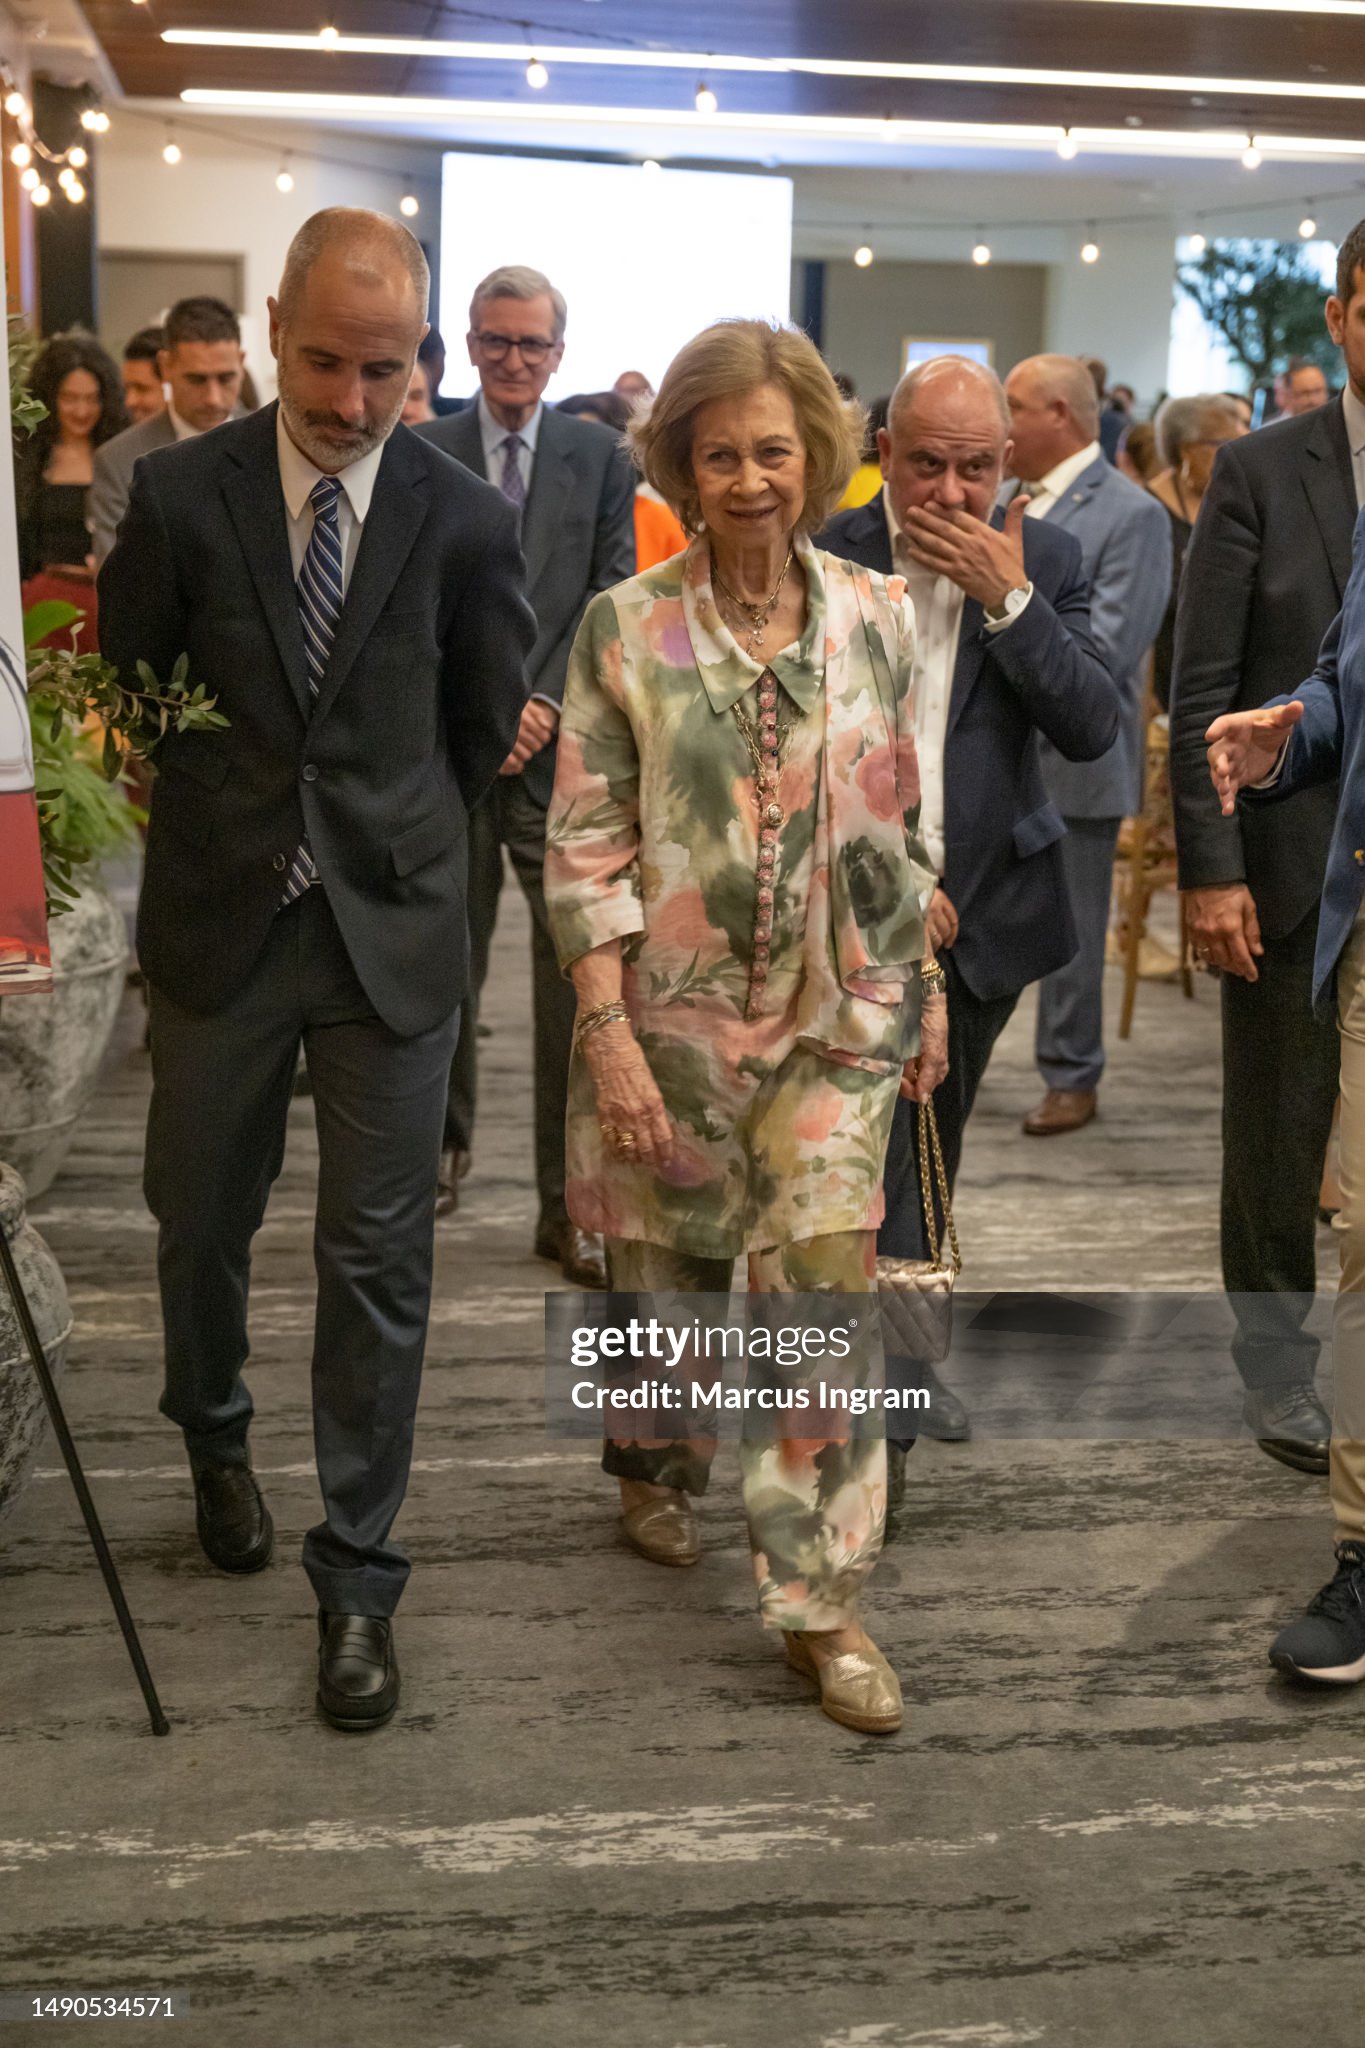 queen-sofia-of-spain-attends-spain-fusion-texas-2023-at-c-baldwin-hotel-on-may-15-2023-in.jpg